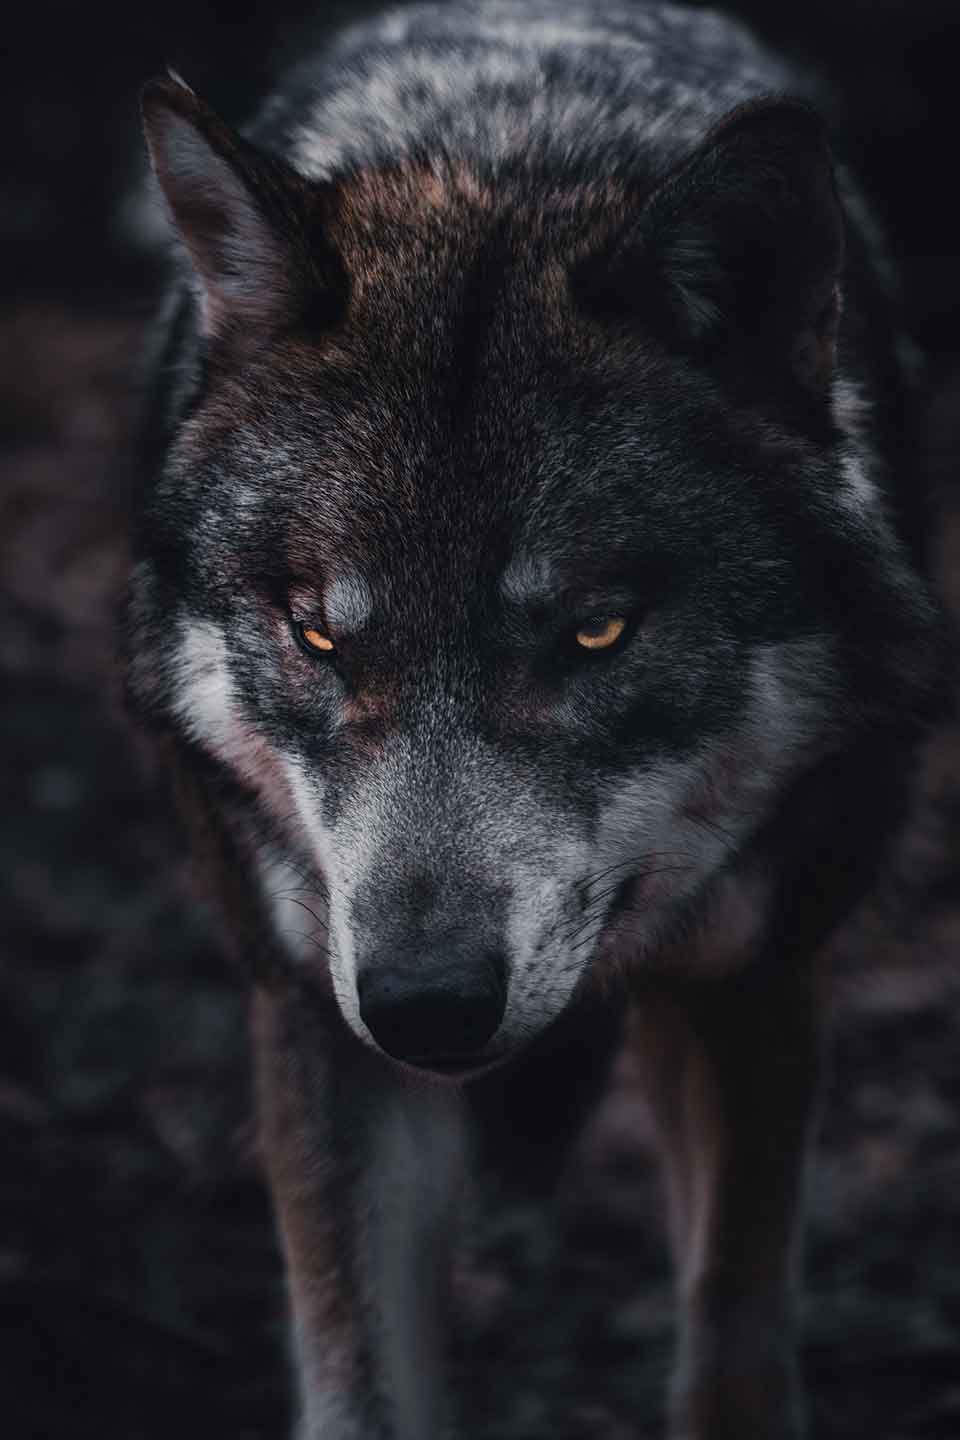 A photograph of a wolf looking at the camera with its head lowered menacingly